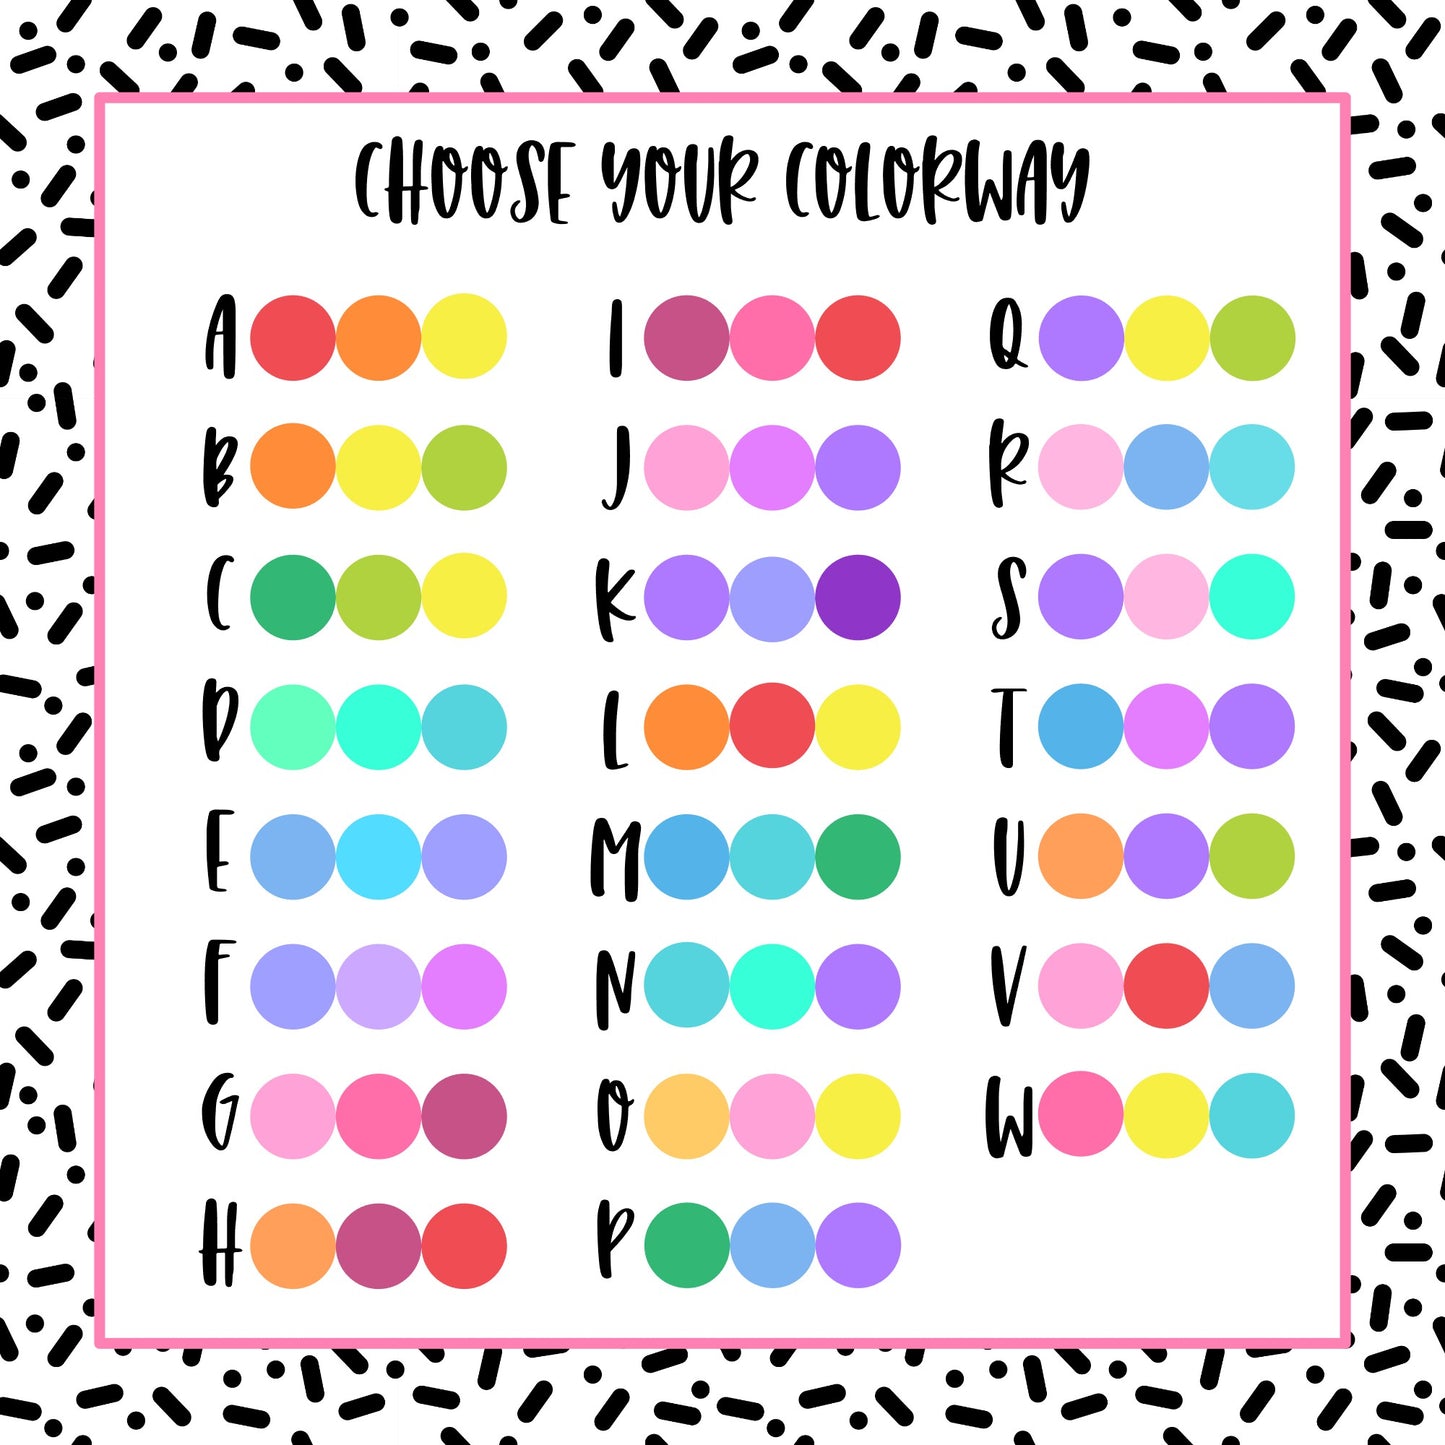 Bright TO DO Boxes - 23 color options